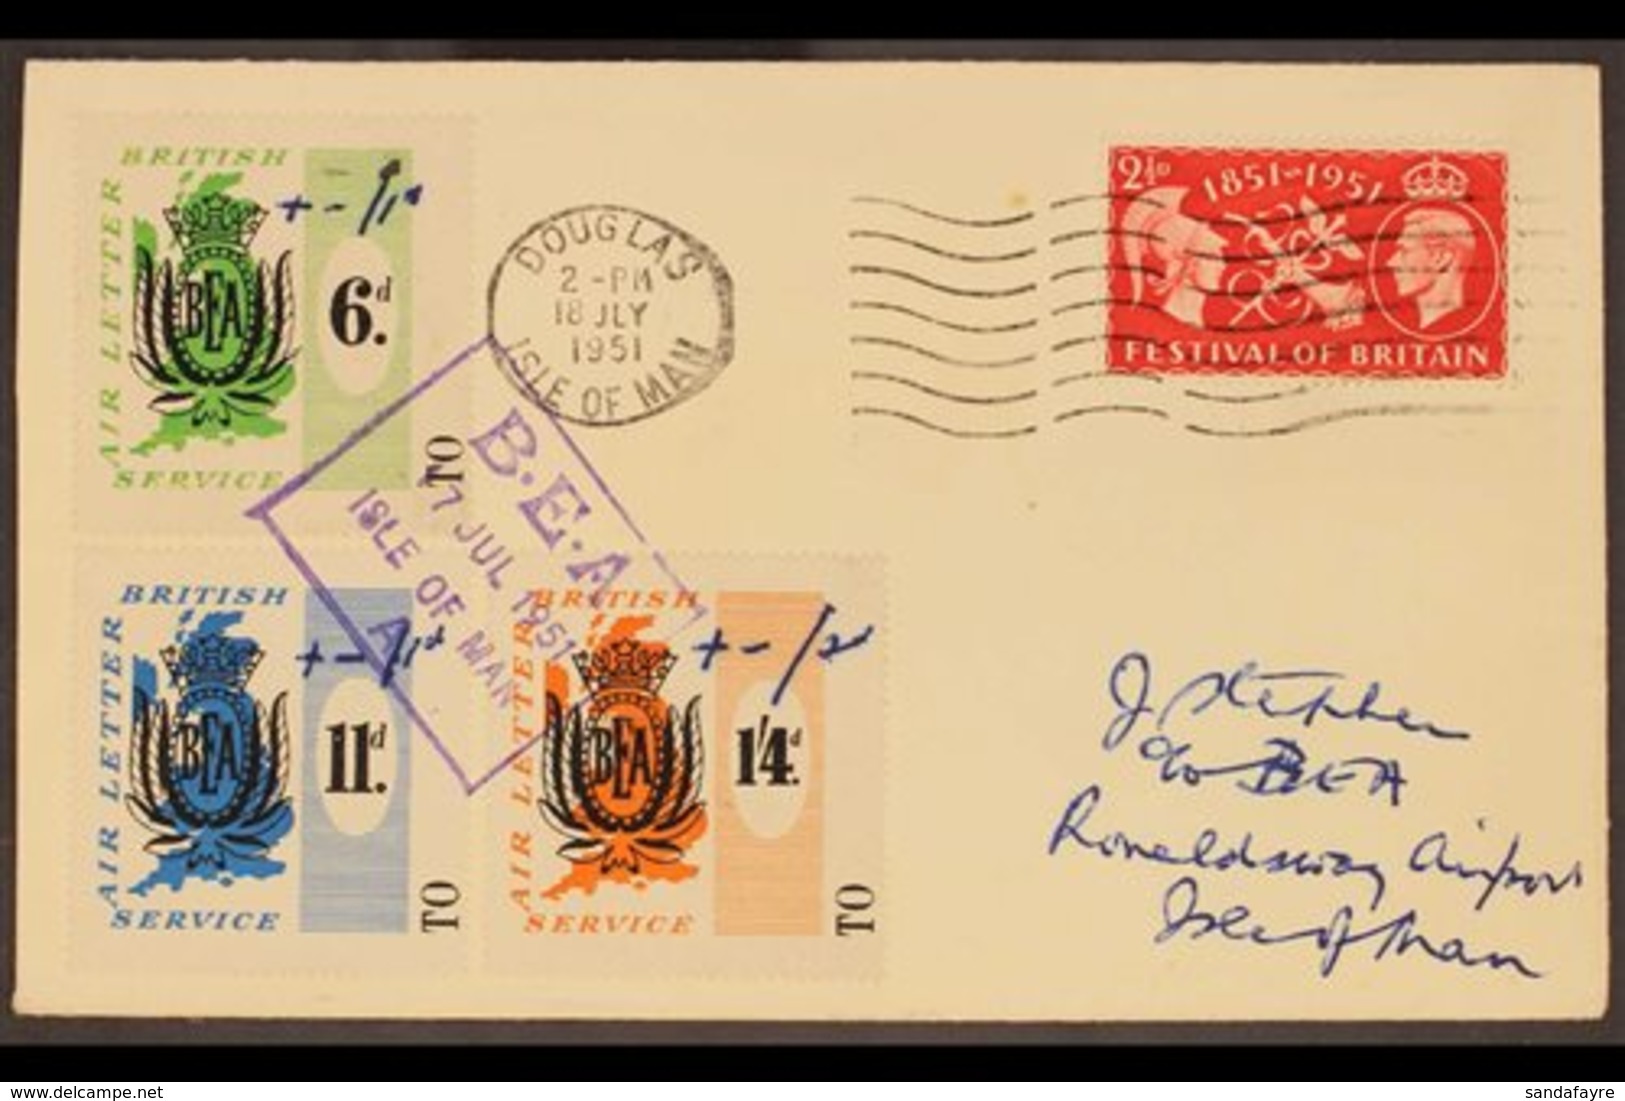 B.E.A. AIR LETTER SCARCE LOCAL SURCHARGES 1951 (17 July) Cover From Douglas To Ronaldsway Bearing GB 2½d Festival Plus 6 - Unclassified